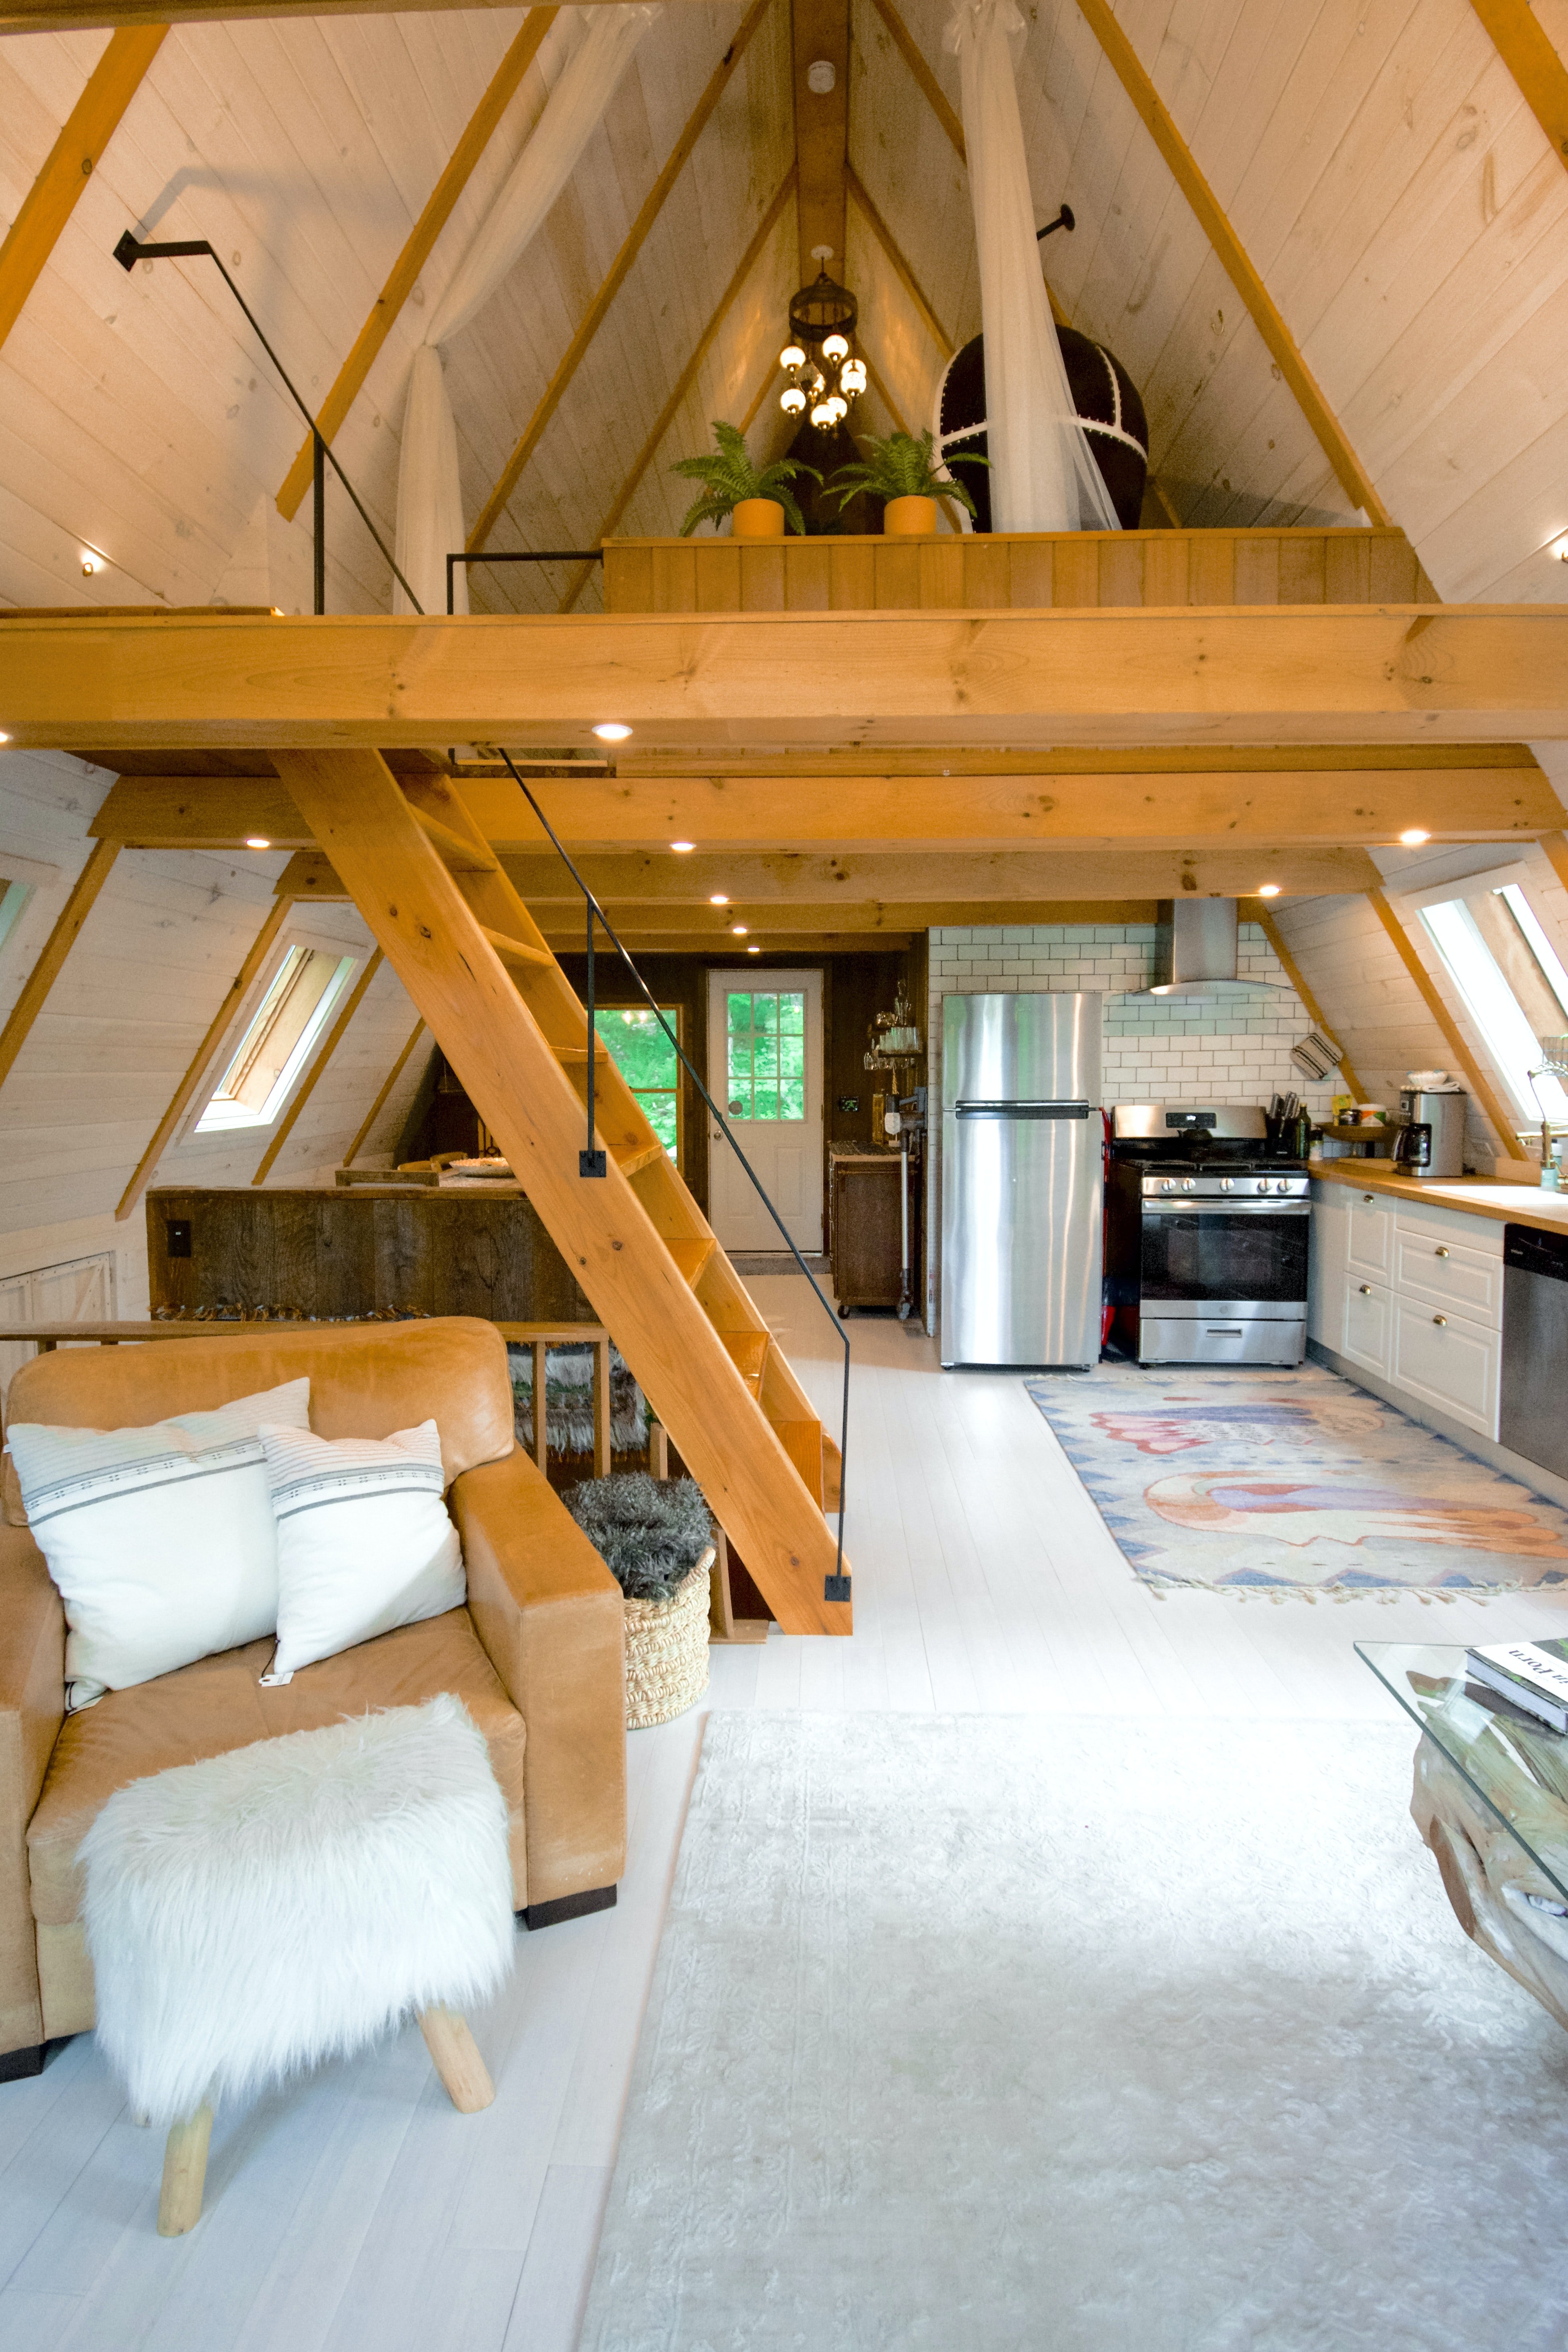 5 Tips to Consider When Designing a Tiny House